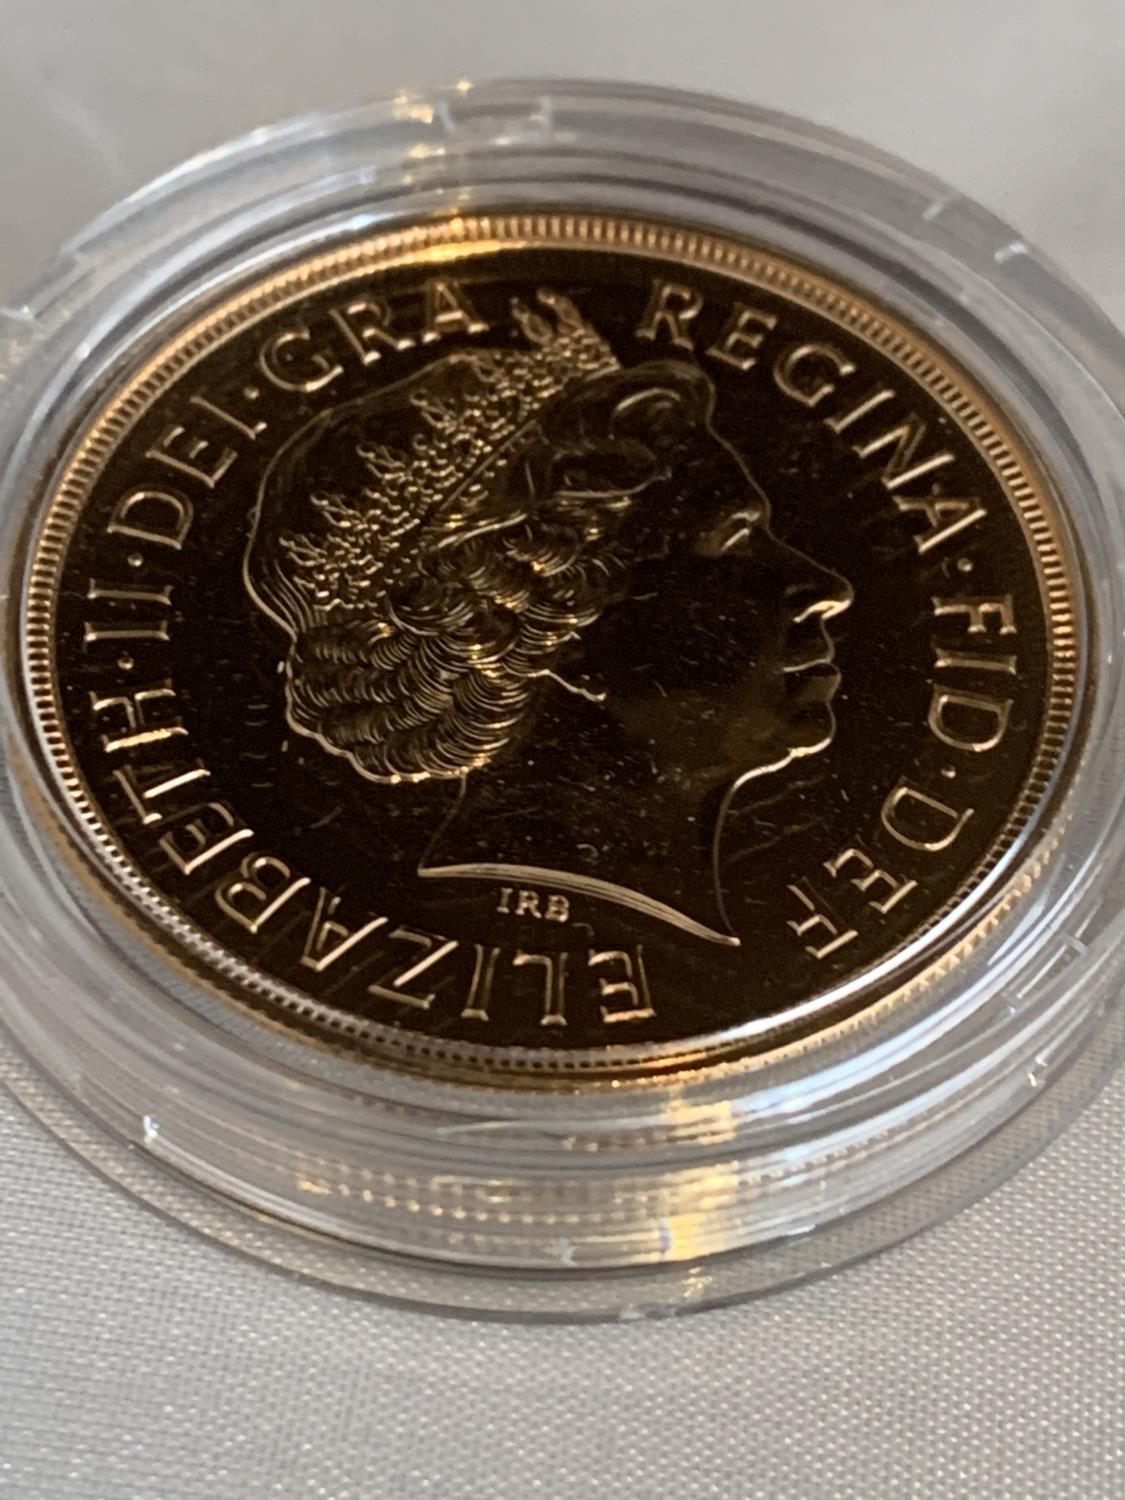 A 2002 GOLD PROOF £5 COIN IN A PRESENTATION BOX WITH CERTIFICATE - Image 3 of 4